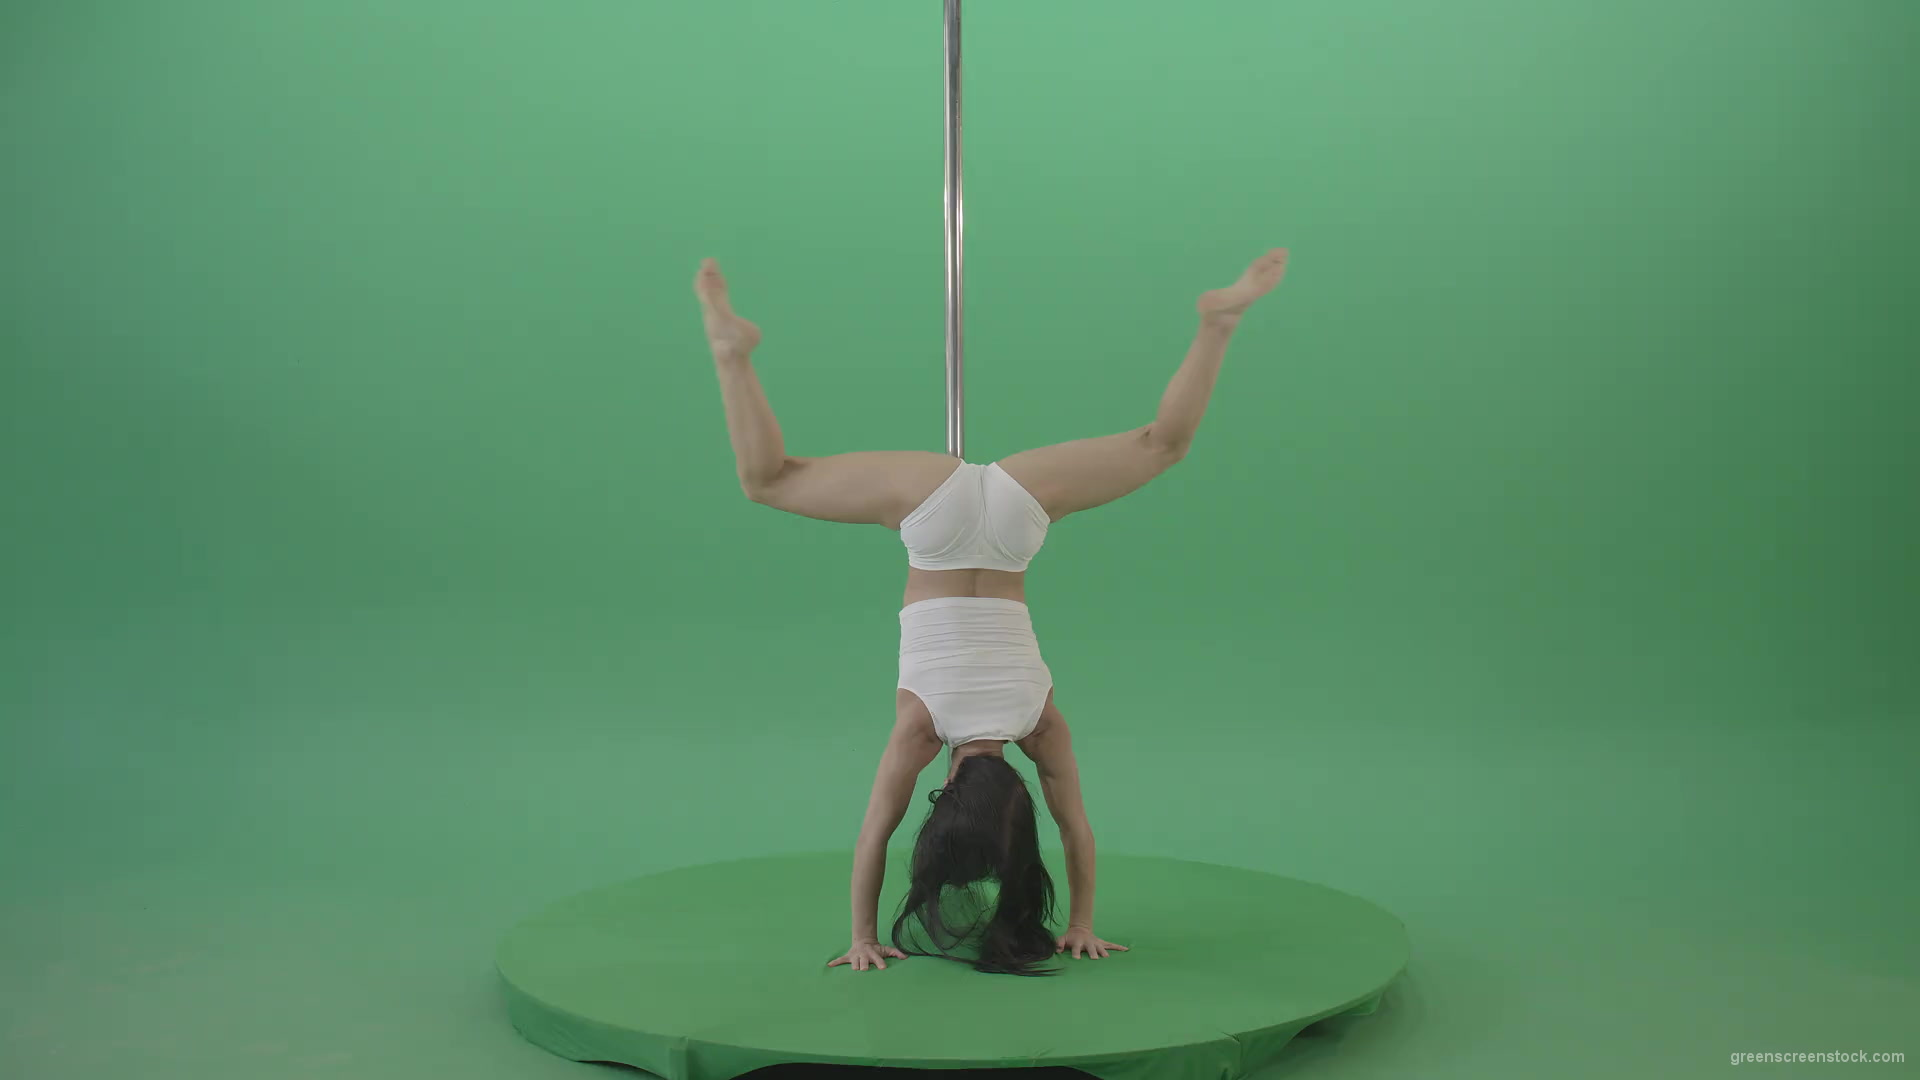 Pole-Dance-Girl-waving-two-legs-isolated-on-green-screen-4K-Video-Footage-1920_001 Green Screen Stock